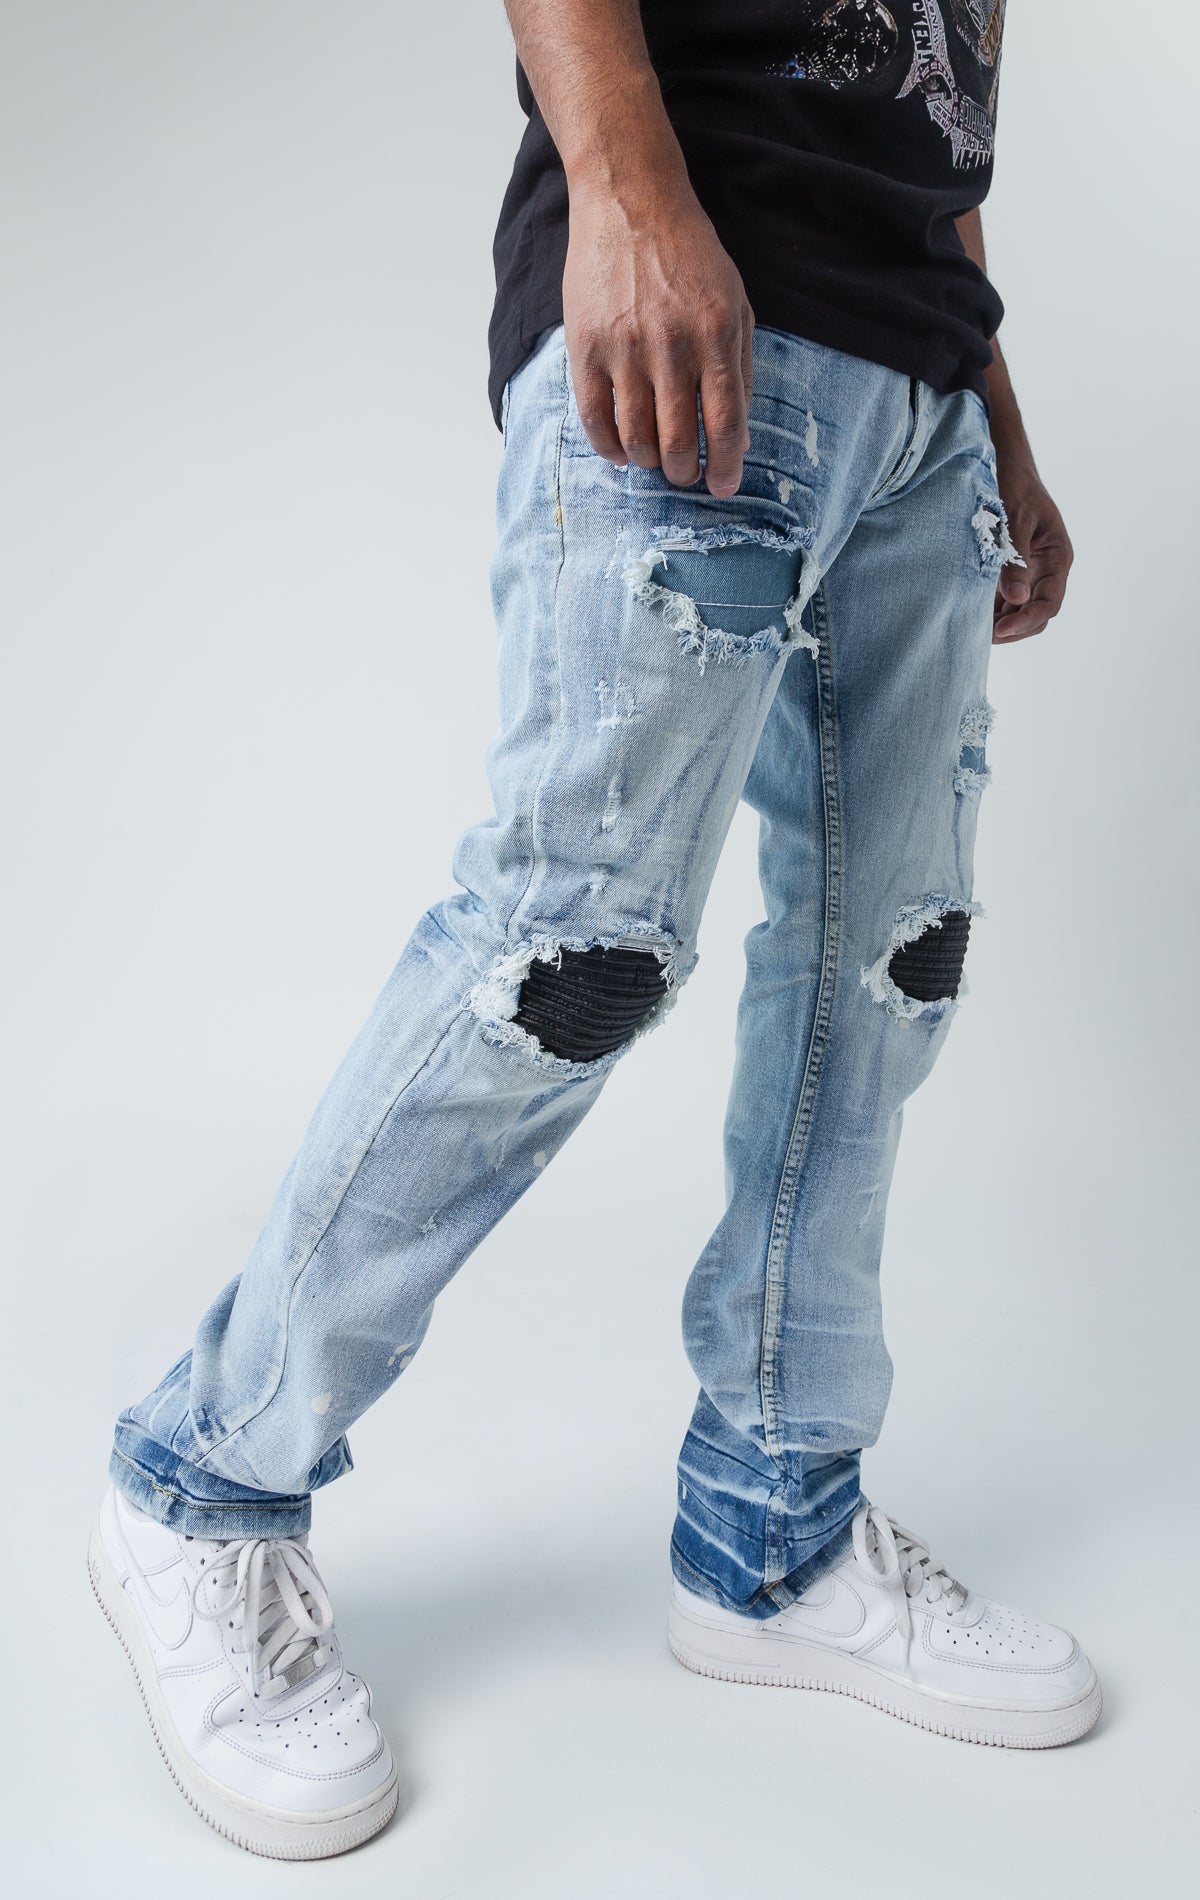 Evolution teared denim pants in ice blue and black